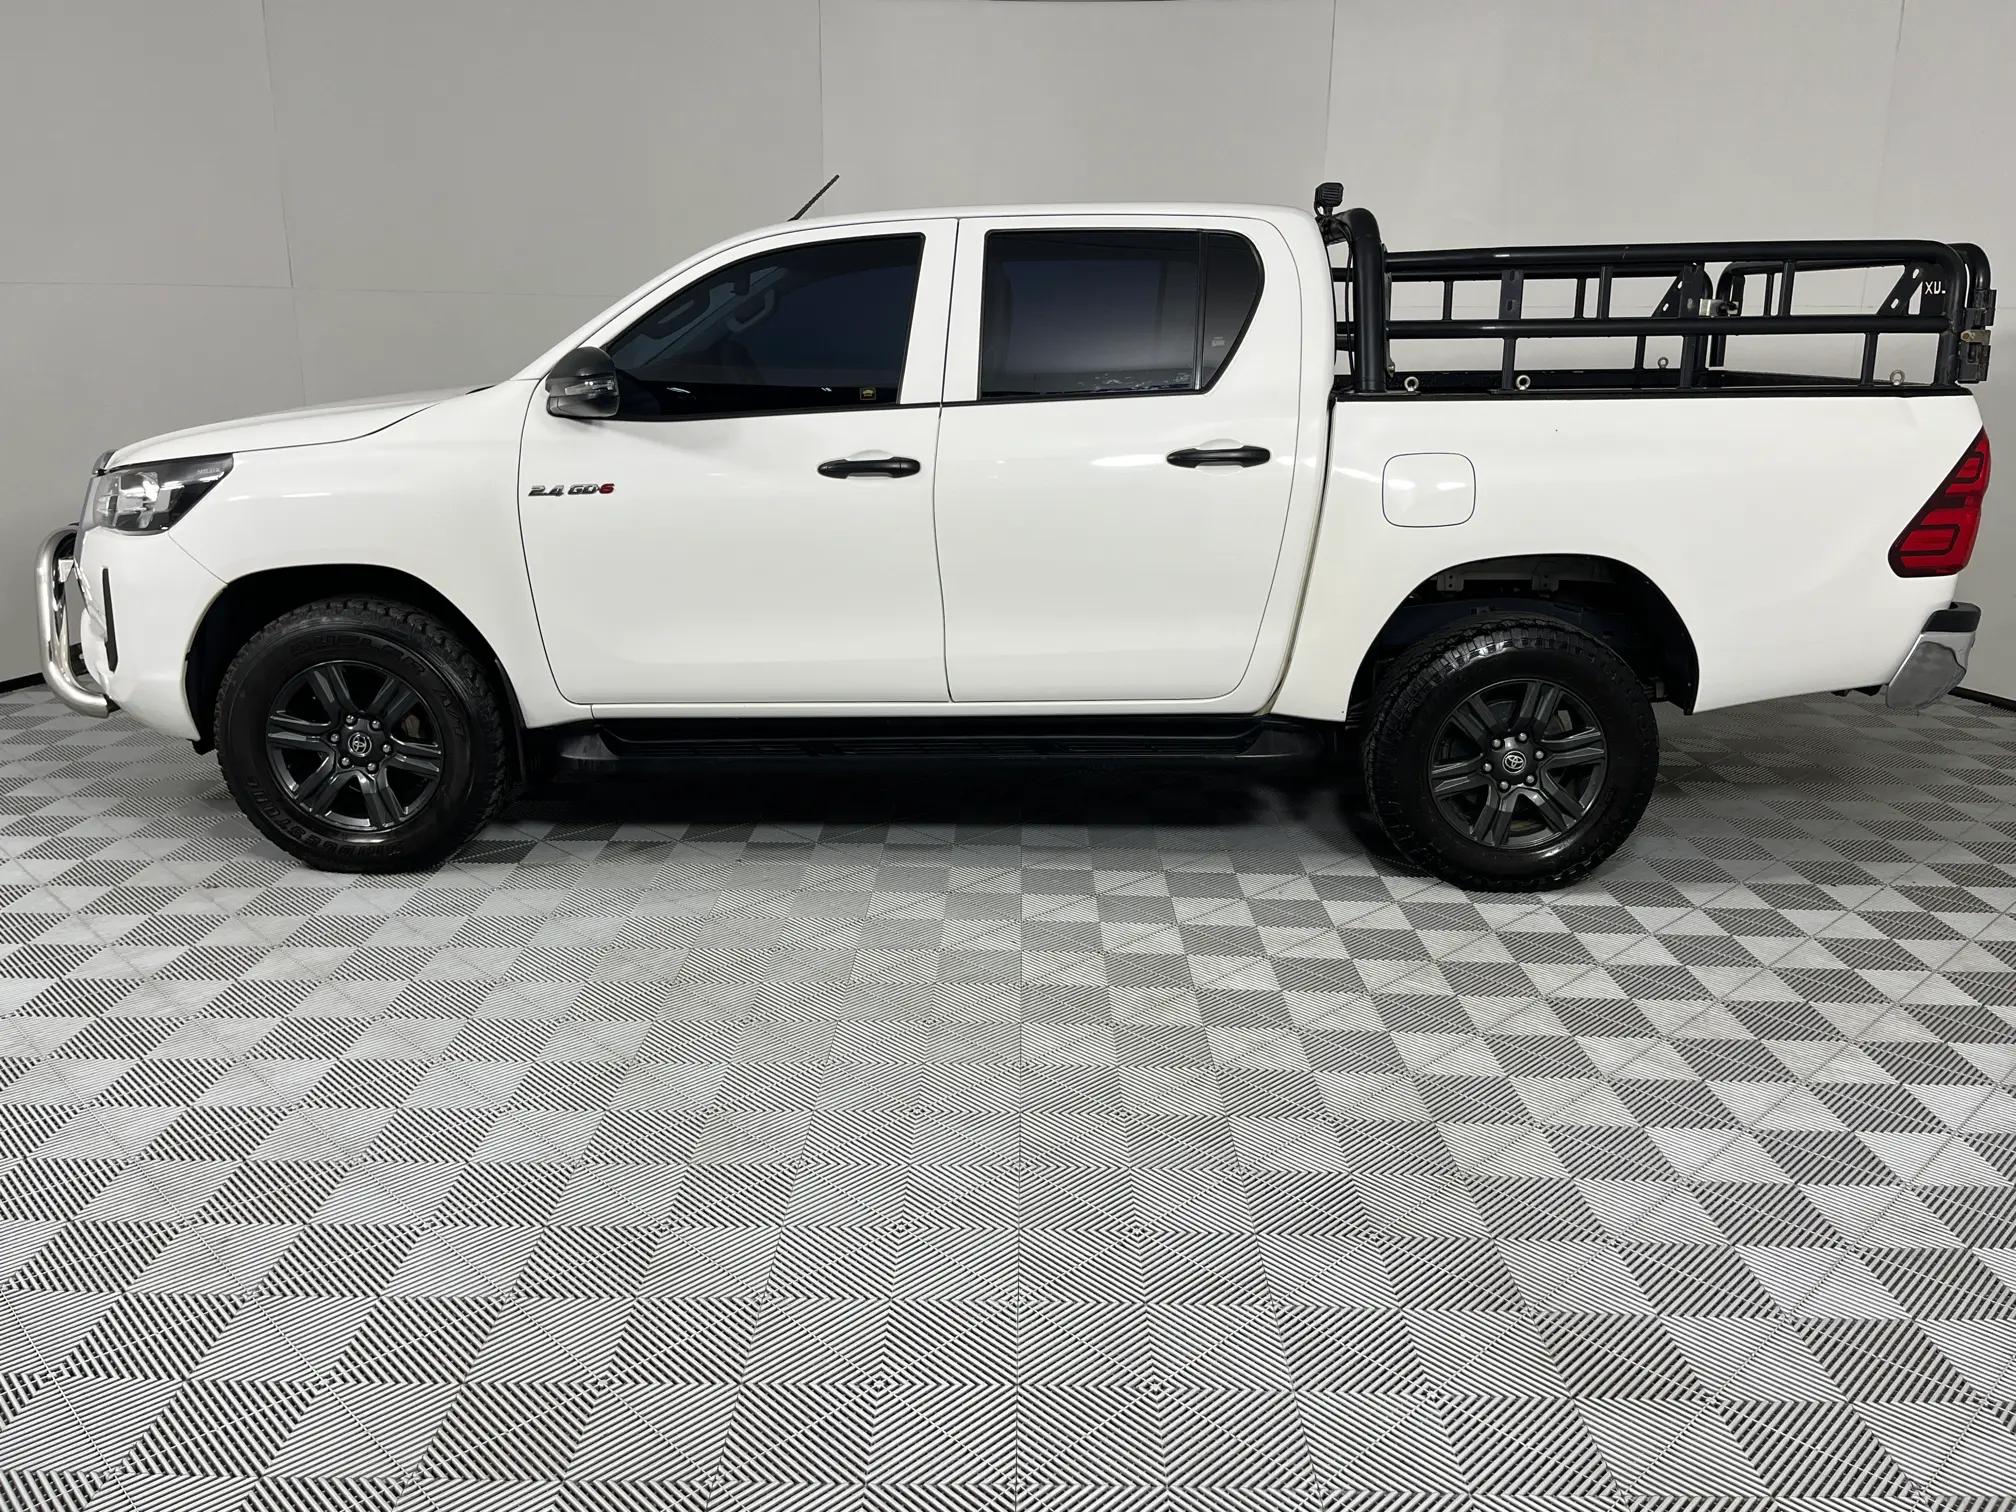 Toyota Hilux 24 Gd 6 Raider Double Cab 4x4 For Sale R 511 900